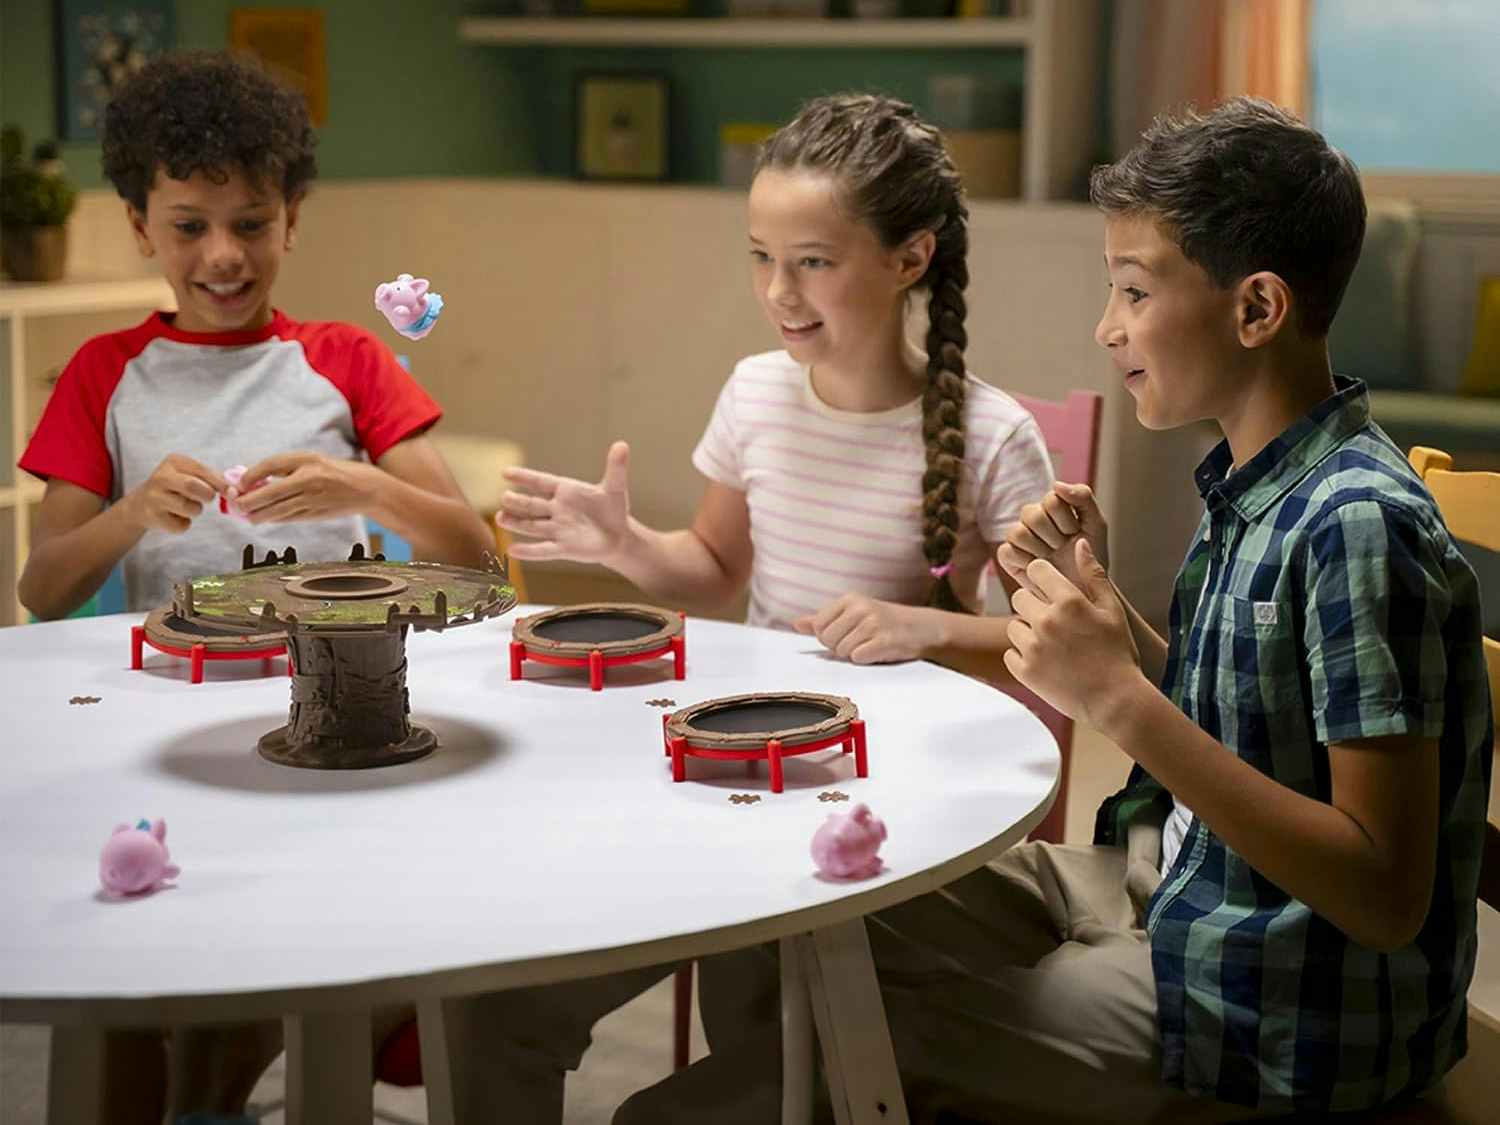 kids playing a game on a table